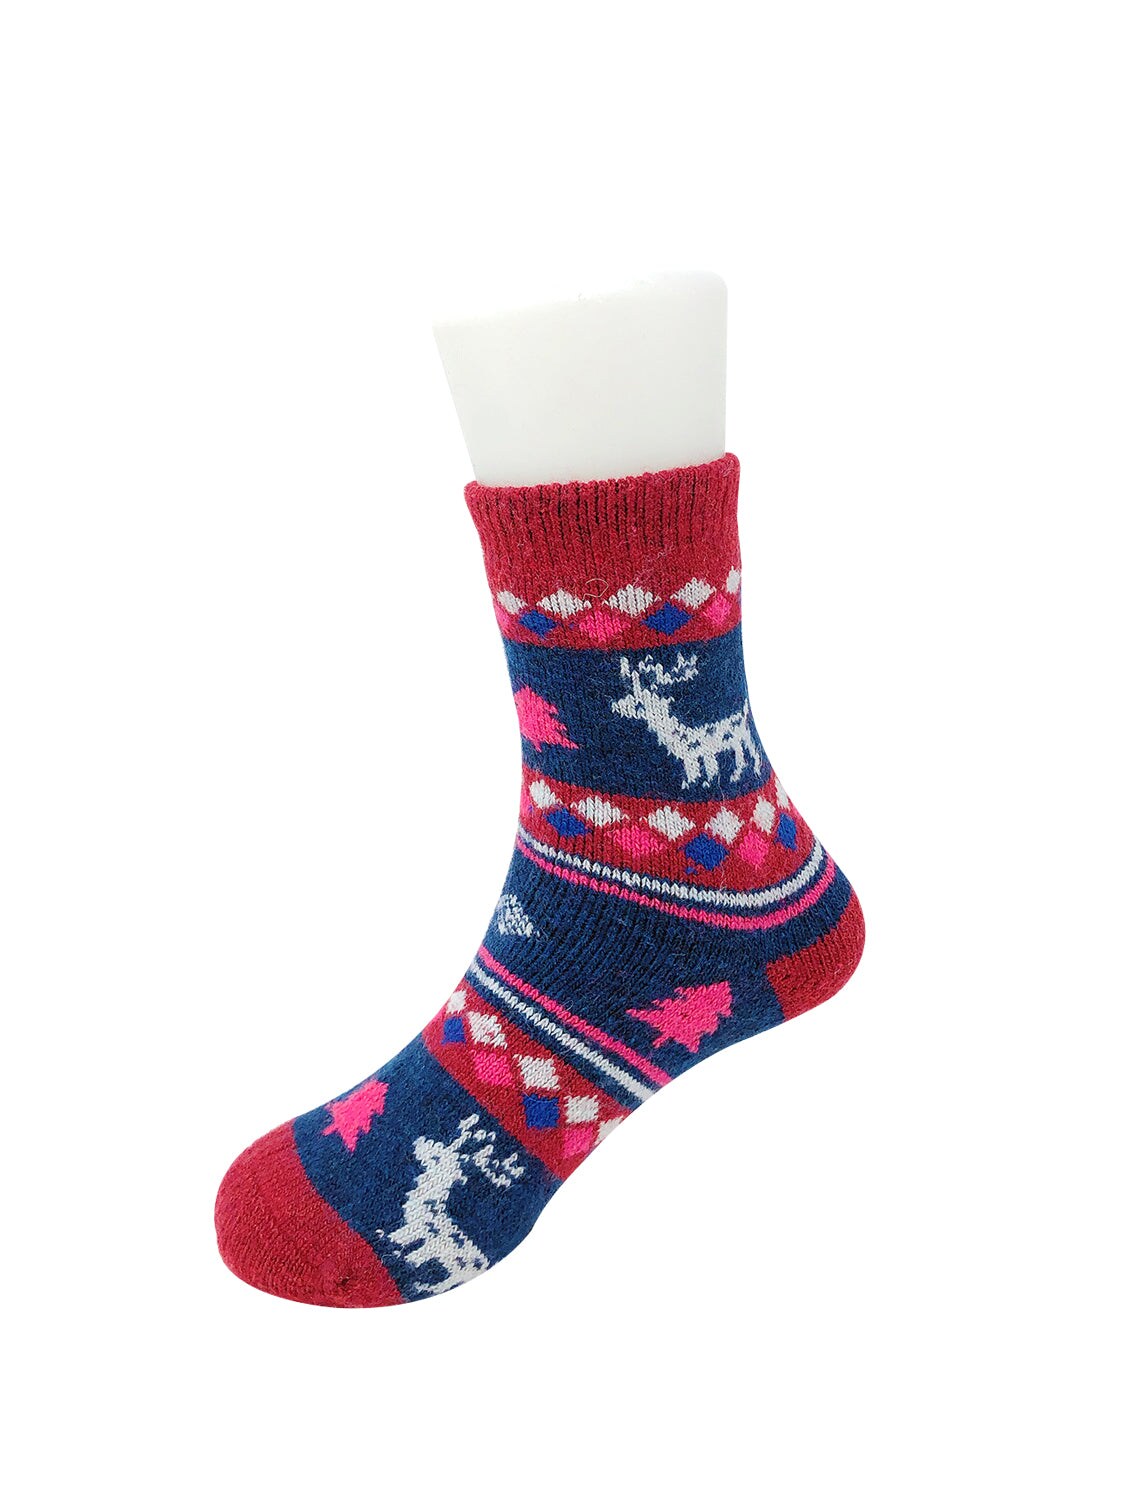 Wrapables Children&#x27;s Thick Winter Warm Wool Socks (Set of 6), Christmas Reindeer / Large